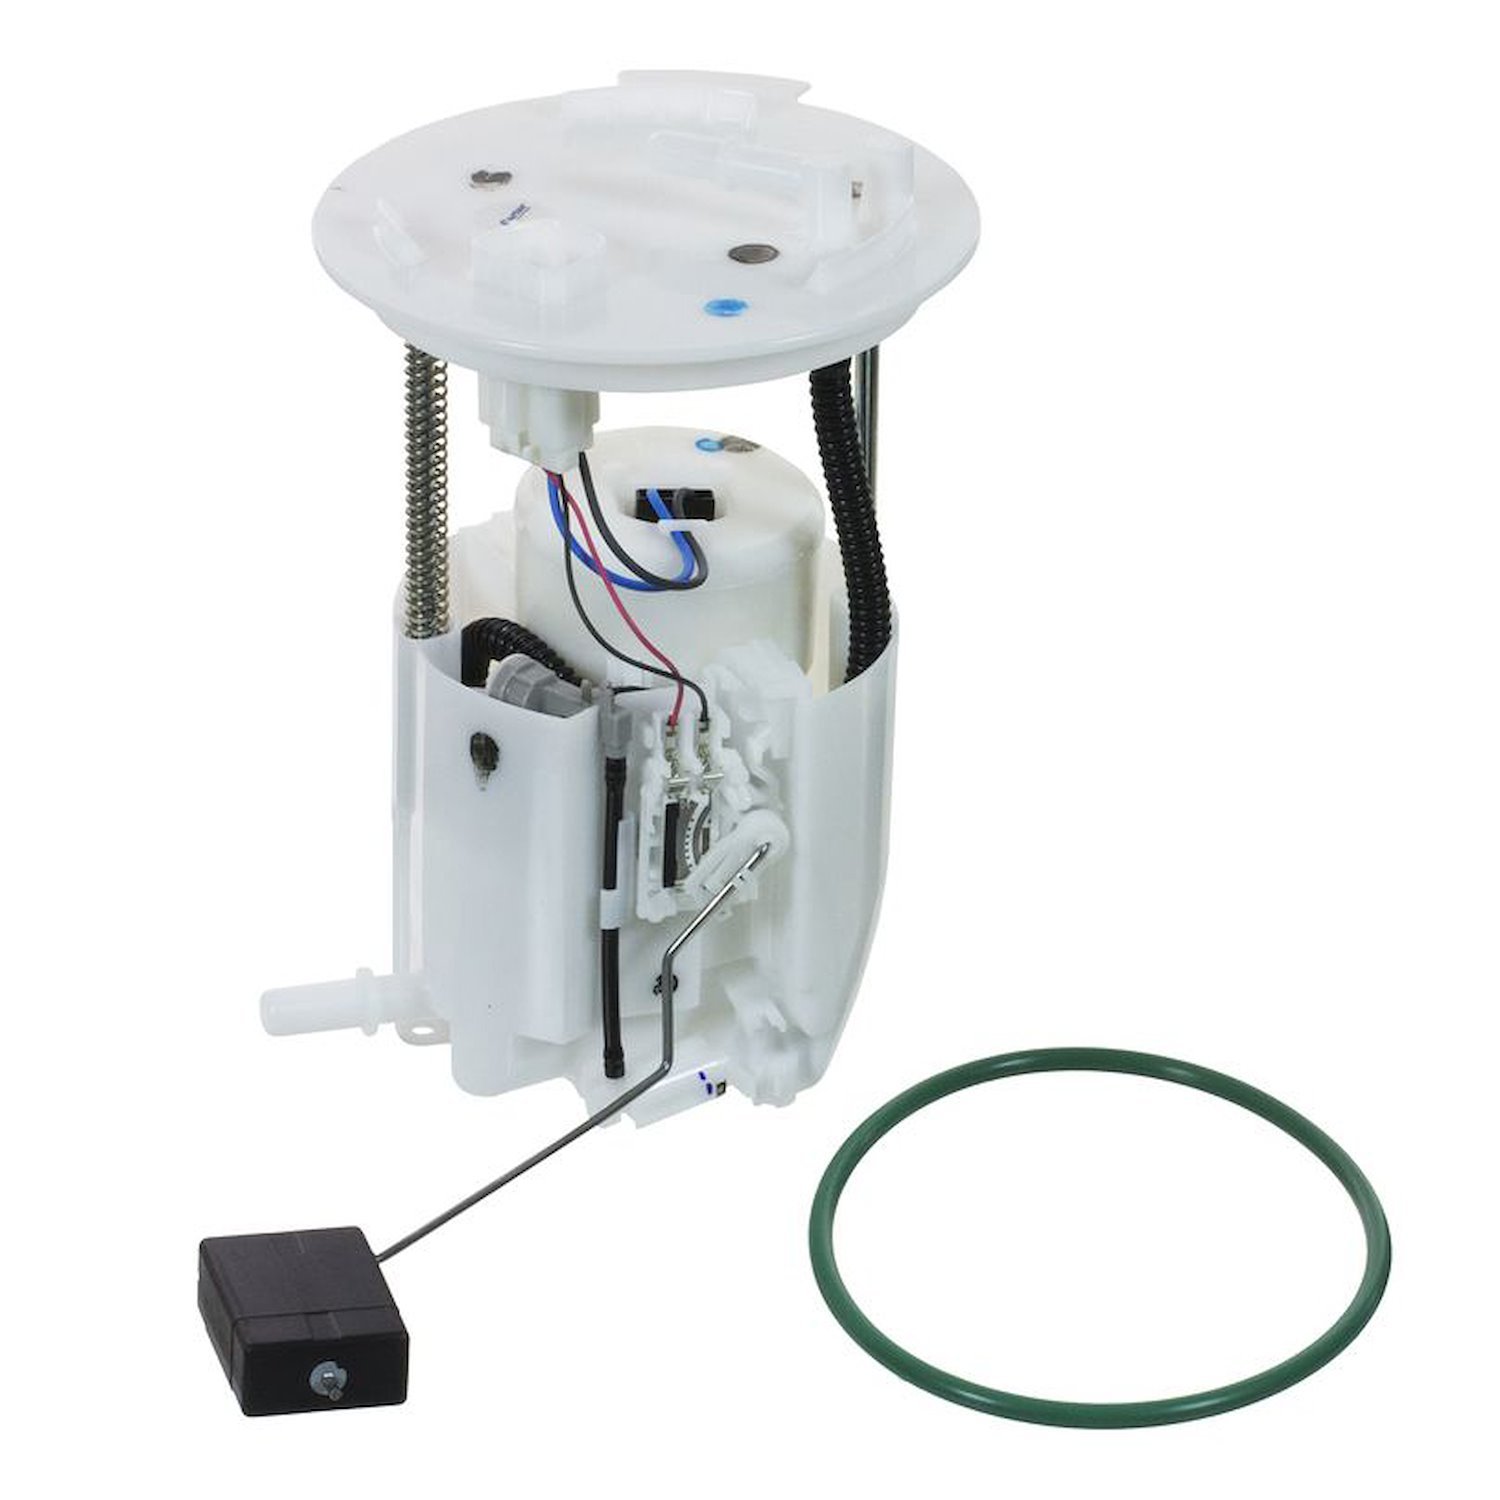 OE Ford Replacement Replacement Fuel Pump Module Assembly for 2007-2009 Ford Fusion/Lincoln MKZ/Mercury Milan